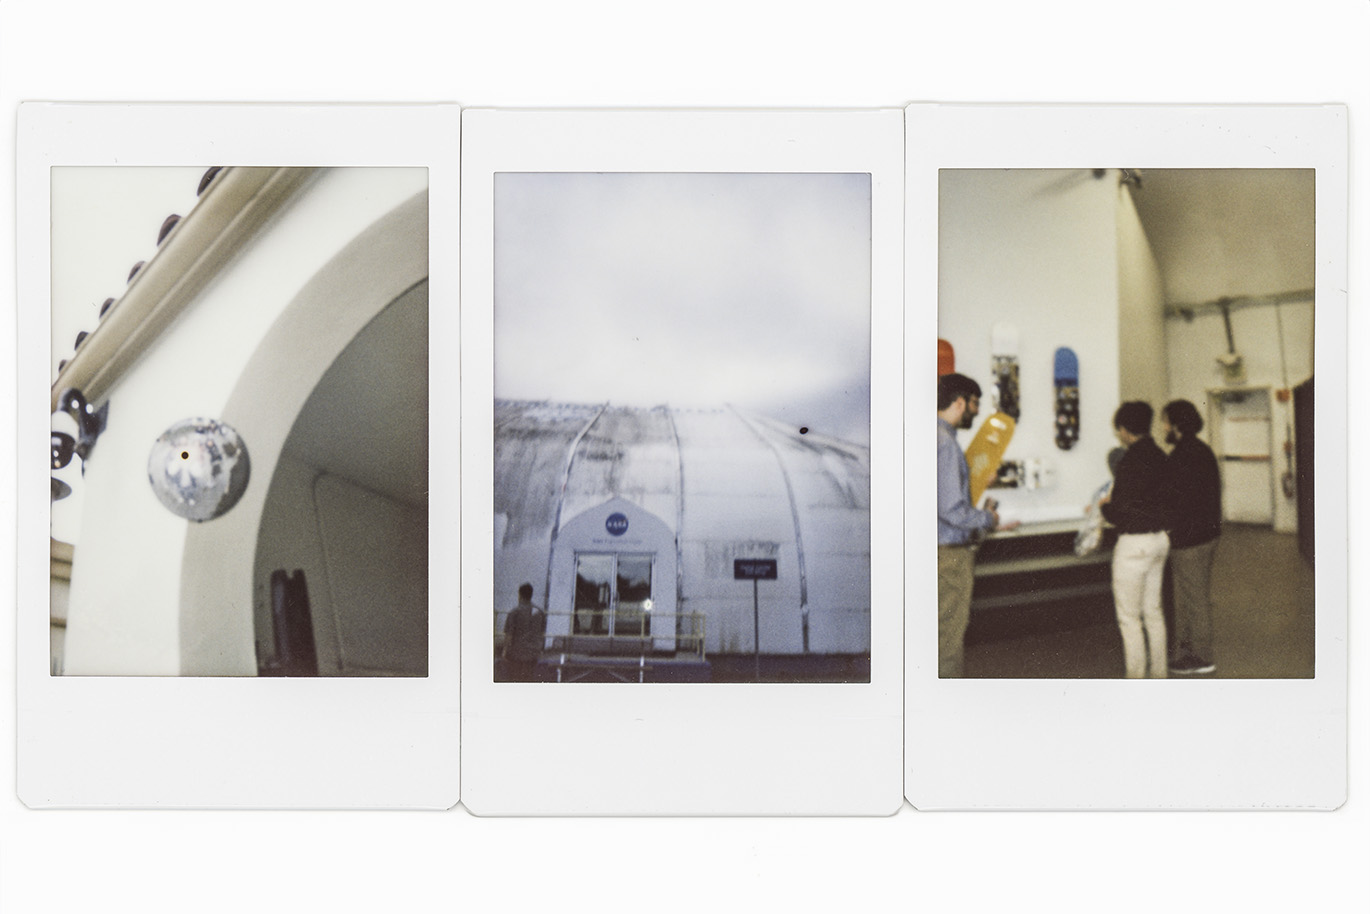 Set of three scanned polaroid photos showing a detail of a building, a building entrance and the inside of a gift shop.